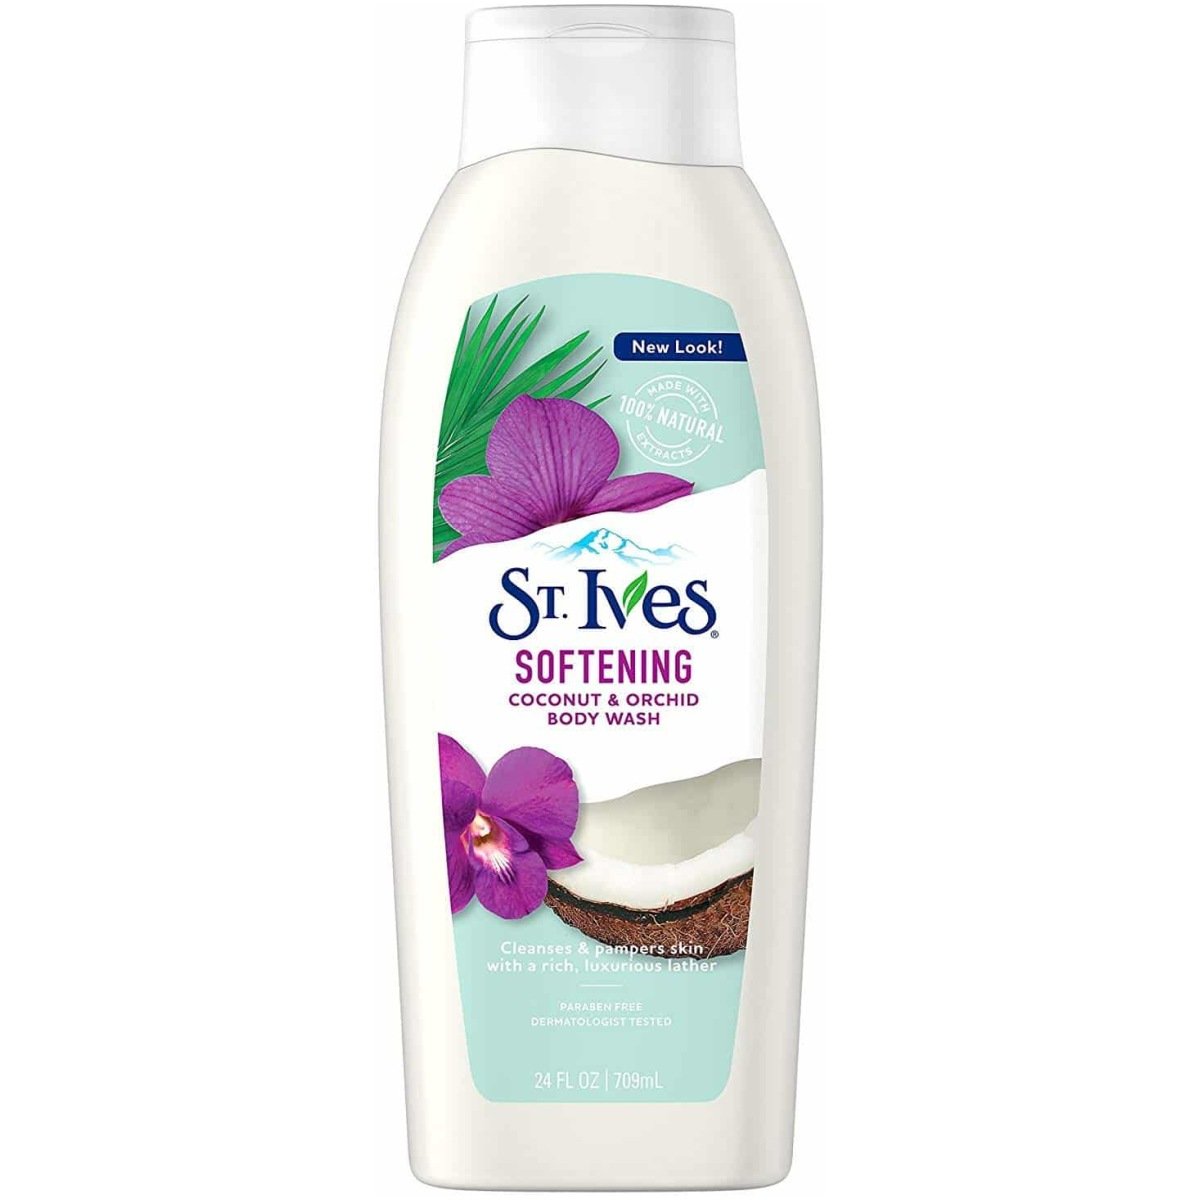 St. Ives Softening Coconut & Orchid Body Wash 709 ml